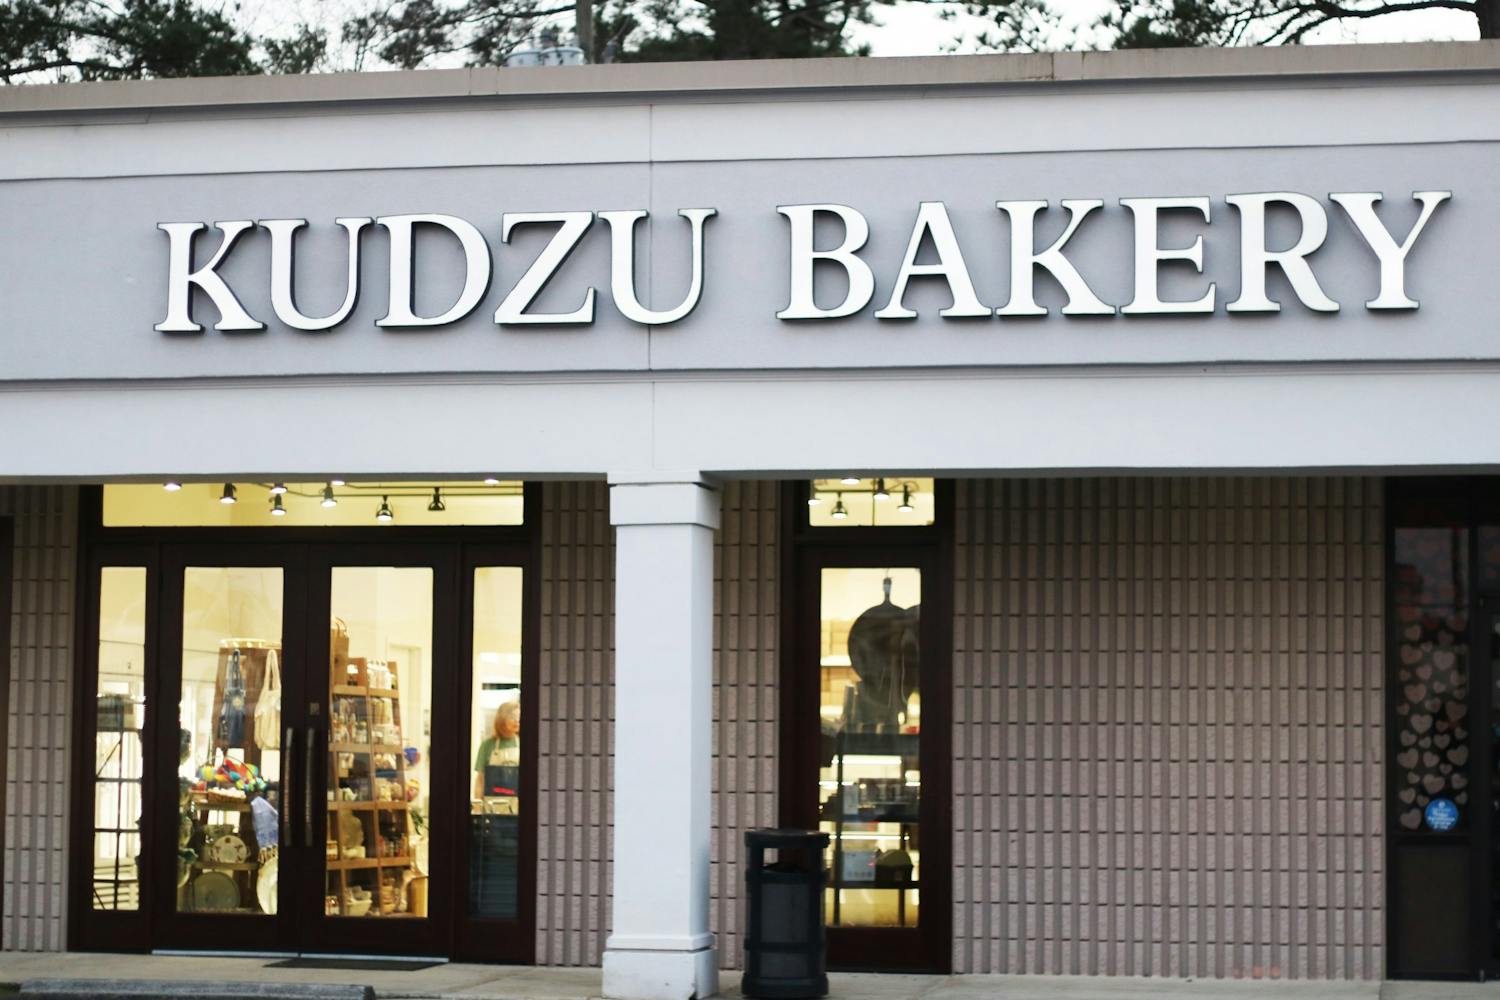 Kudzu Bakery is a small bakery and market chain within South Carolina. The bakery makes a variety of items ranging from breakfast items, desserts and breads.